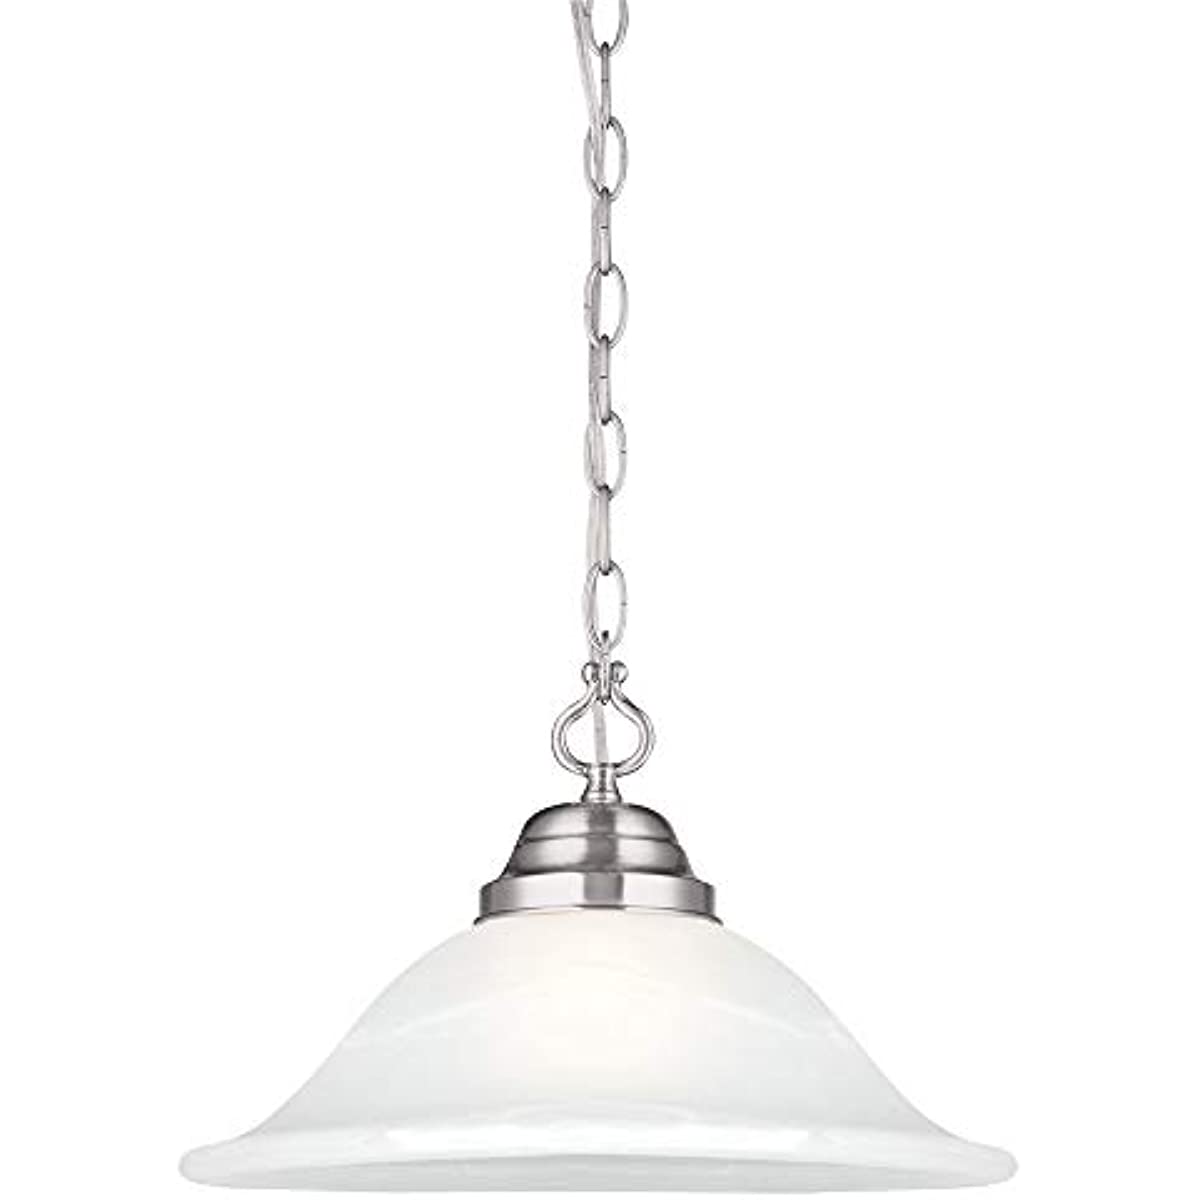 

Millbridge Traditional 1-Light Indoor Hanging Swag Light with Alabaster Glass Shade for Living Dining Room Bar Area, Satin Nickel Finish